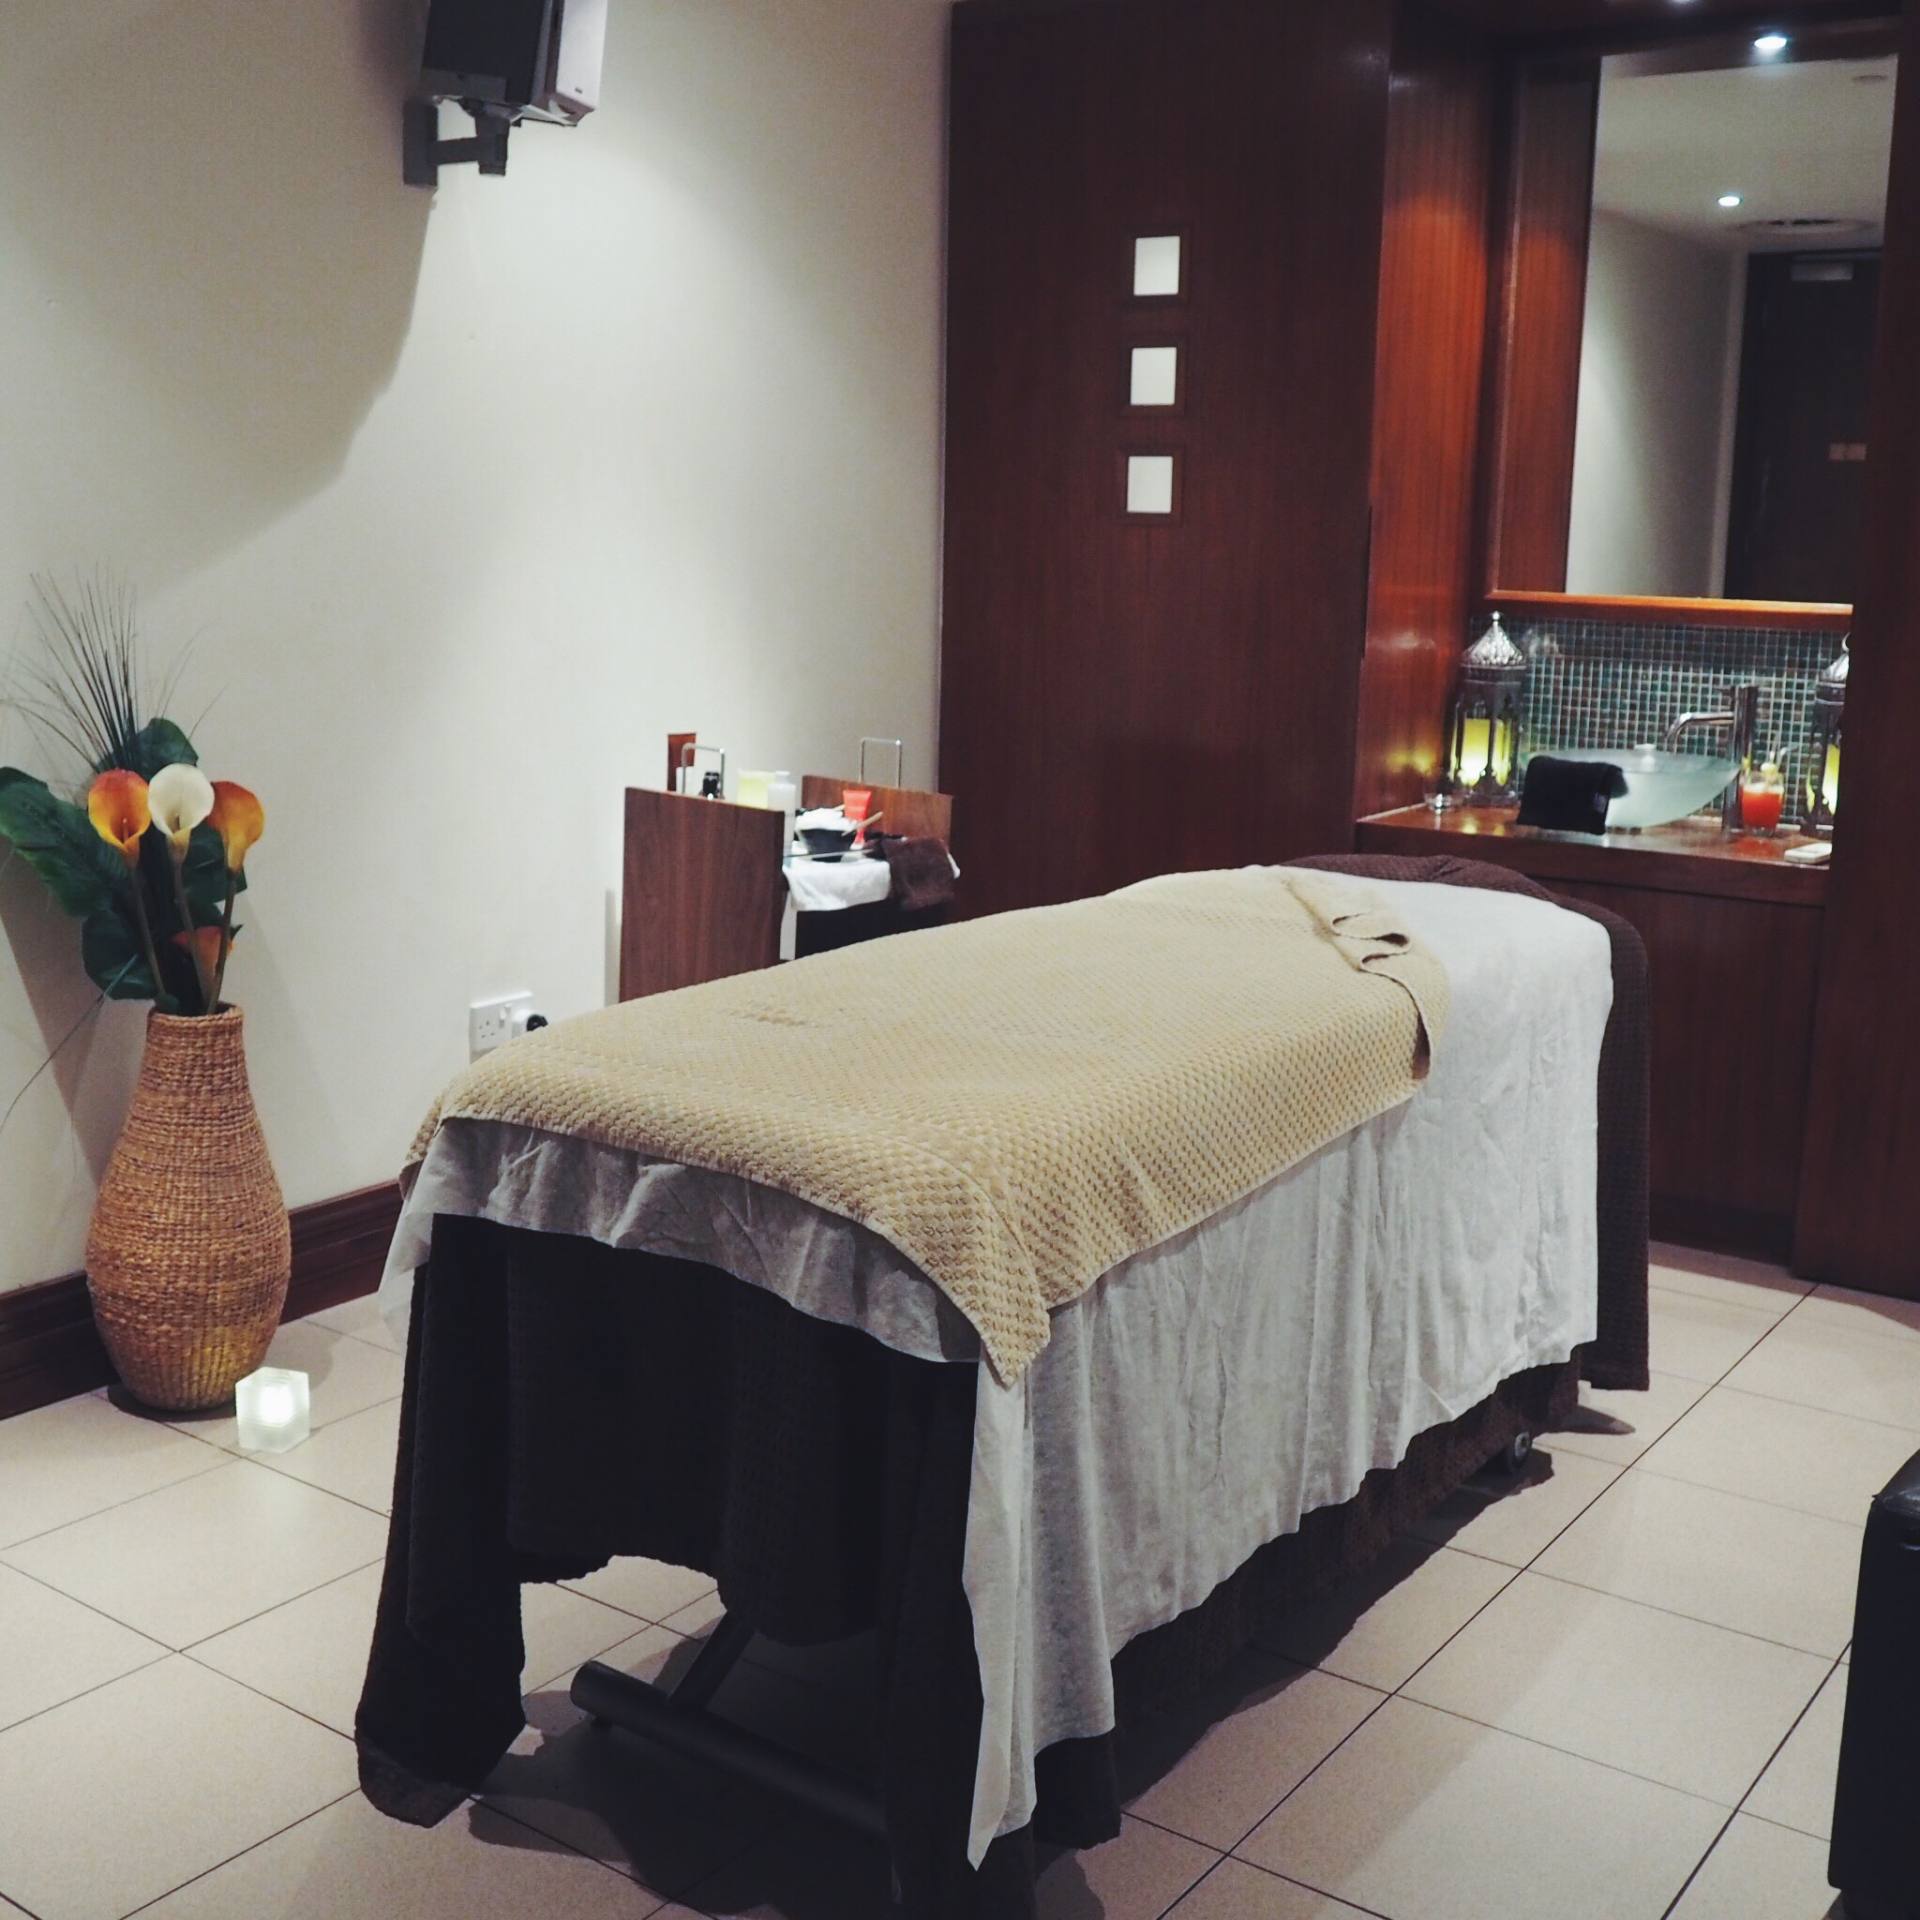 A picture of a beauty treatment room at a spa